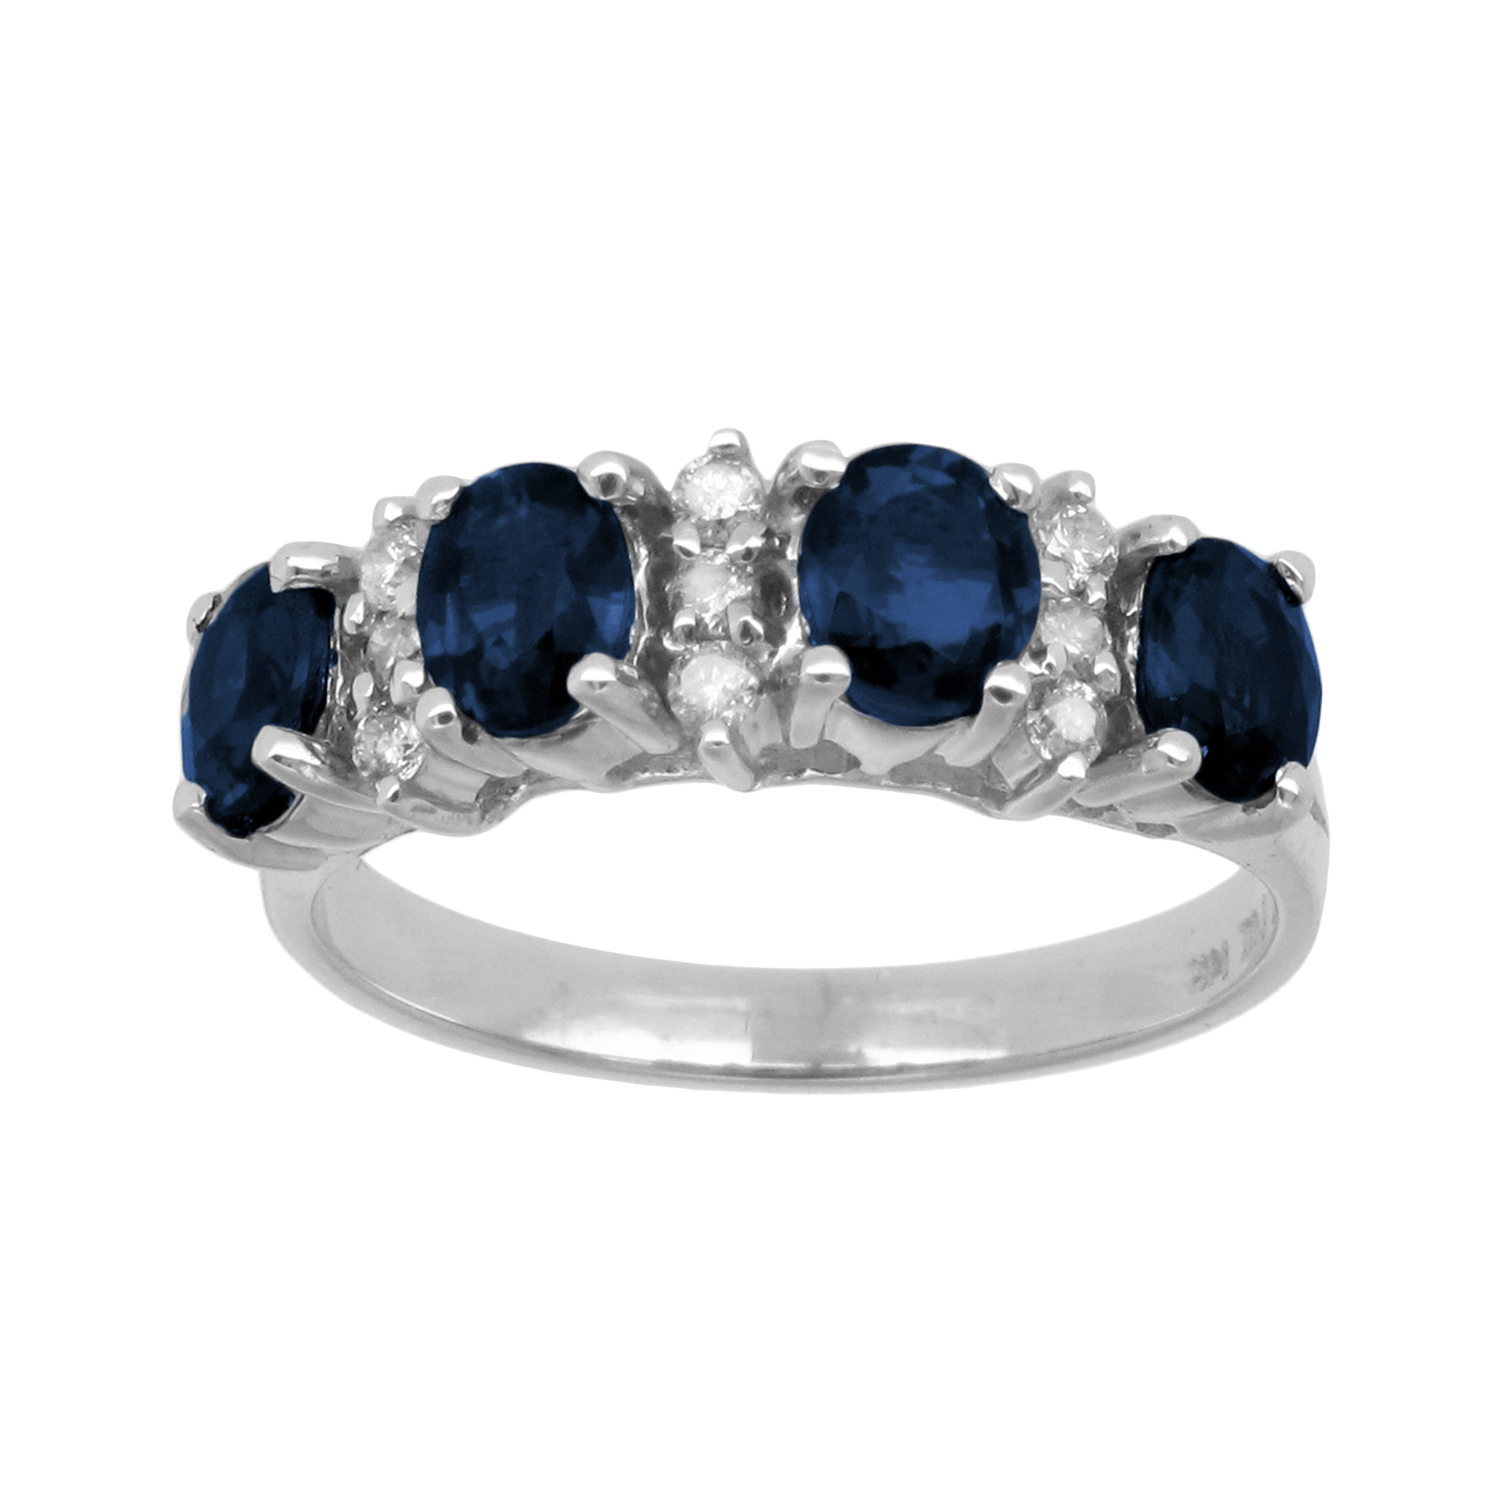 1.94cttw Sapphire and Diamond Fashion Band set in 14k Gold